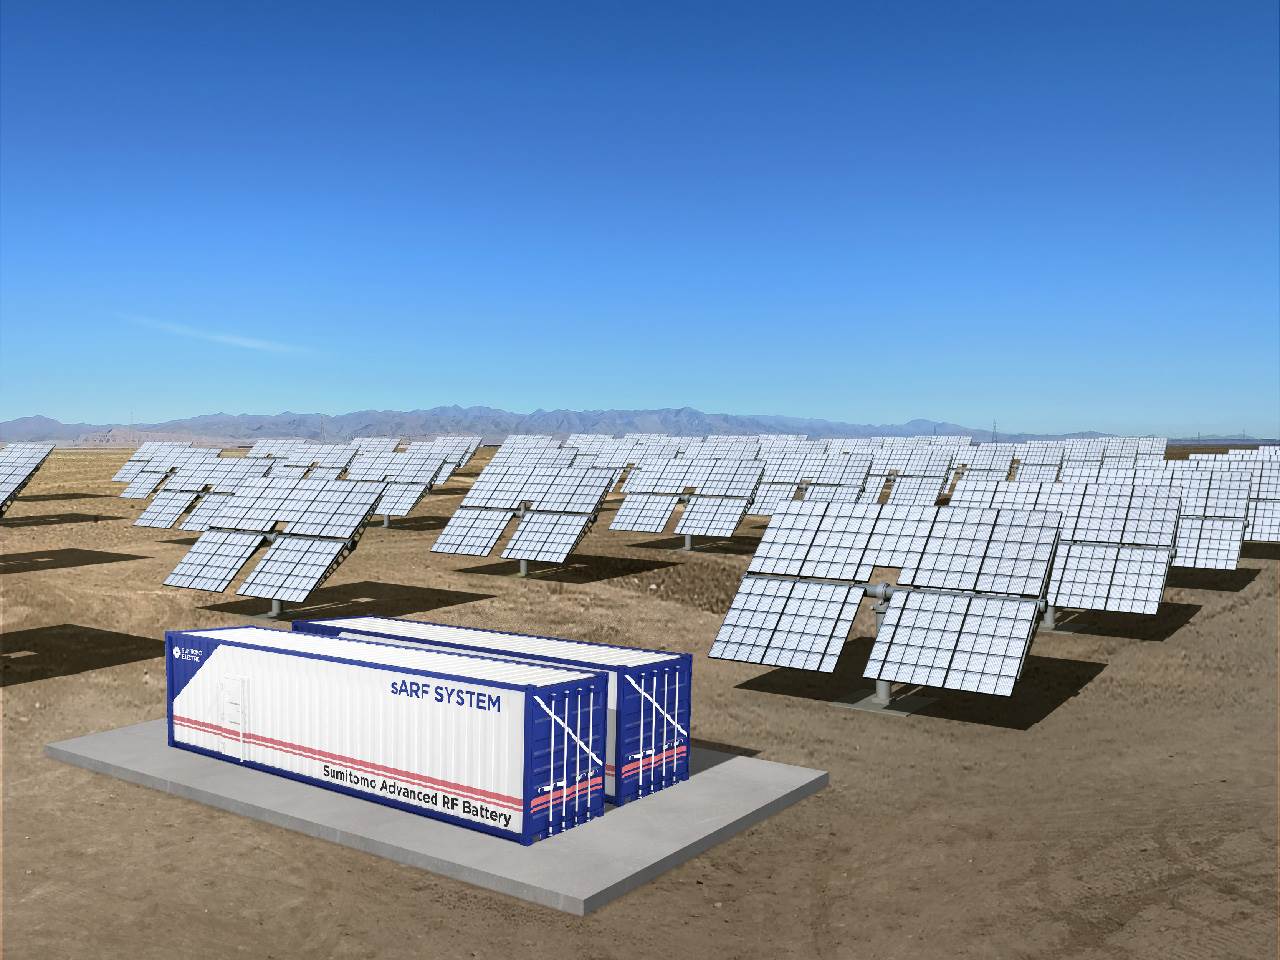 Japanese company to design and install an innovative battery energy storage system in Ouarzazate, Morocco